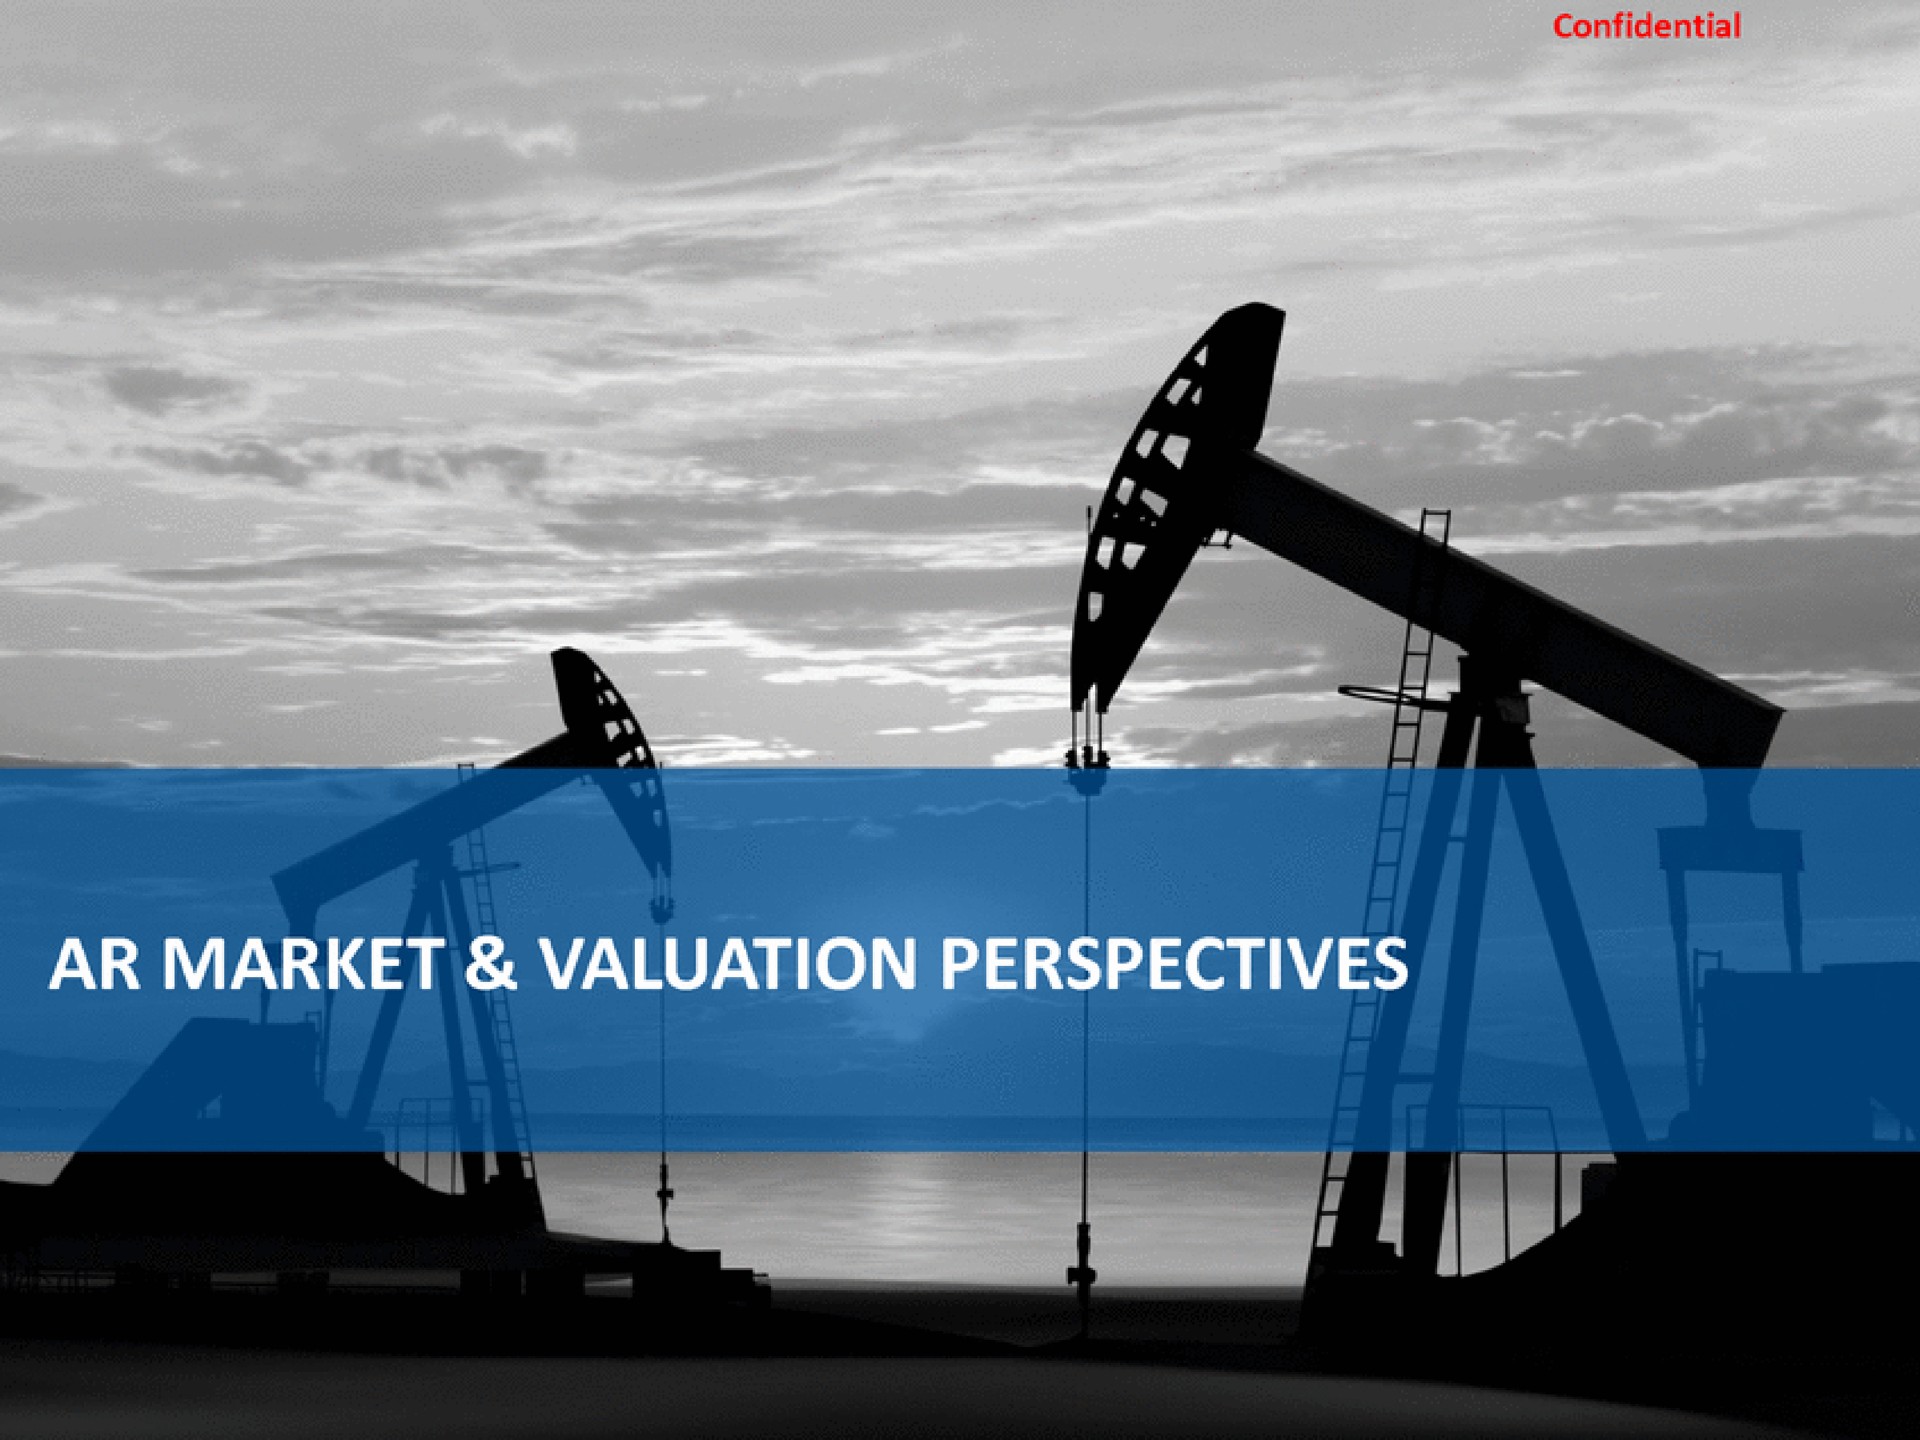 market valuation perspectives a | Baird